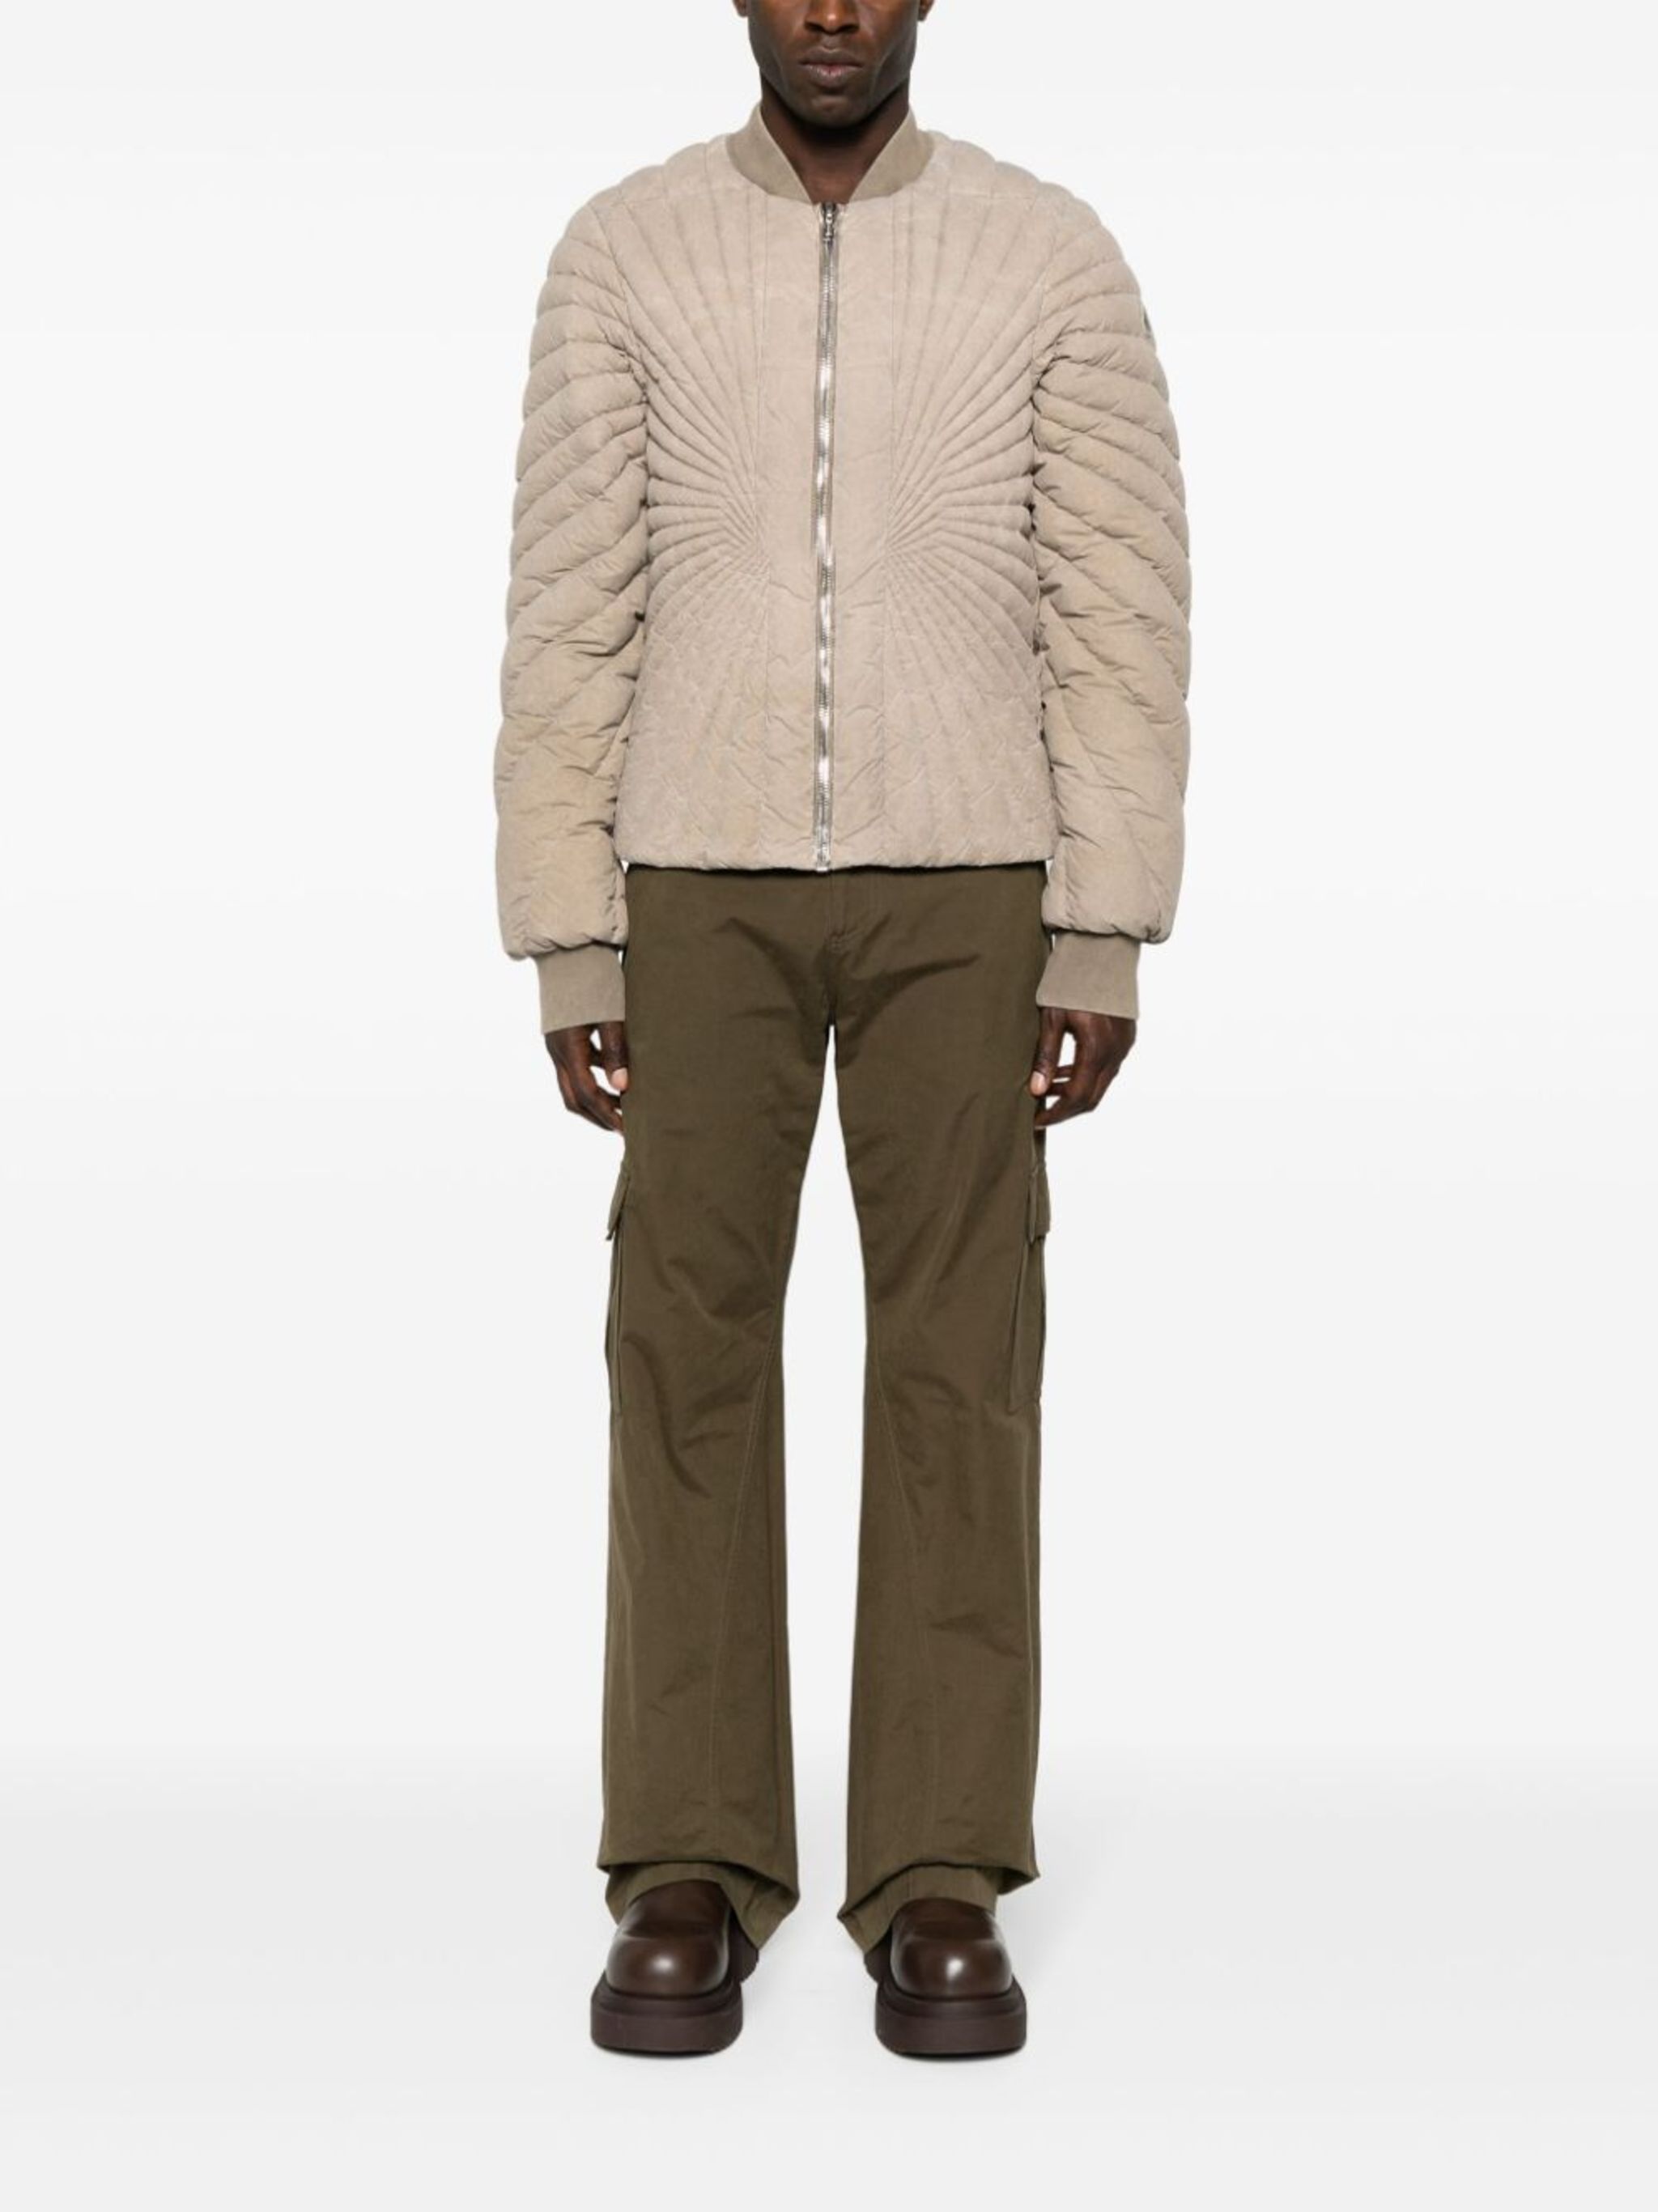 x Rick Owens Radiance Flight quilted bomber jacket - 2